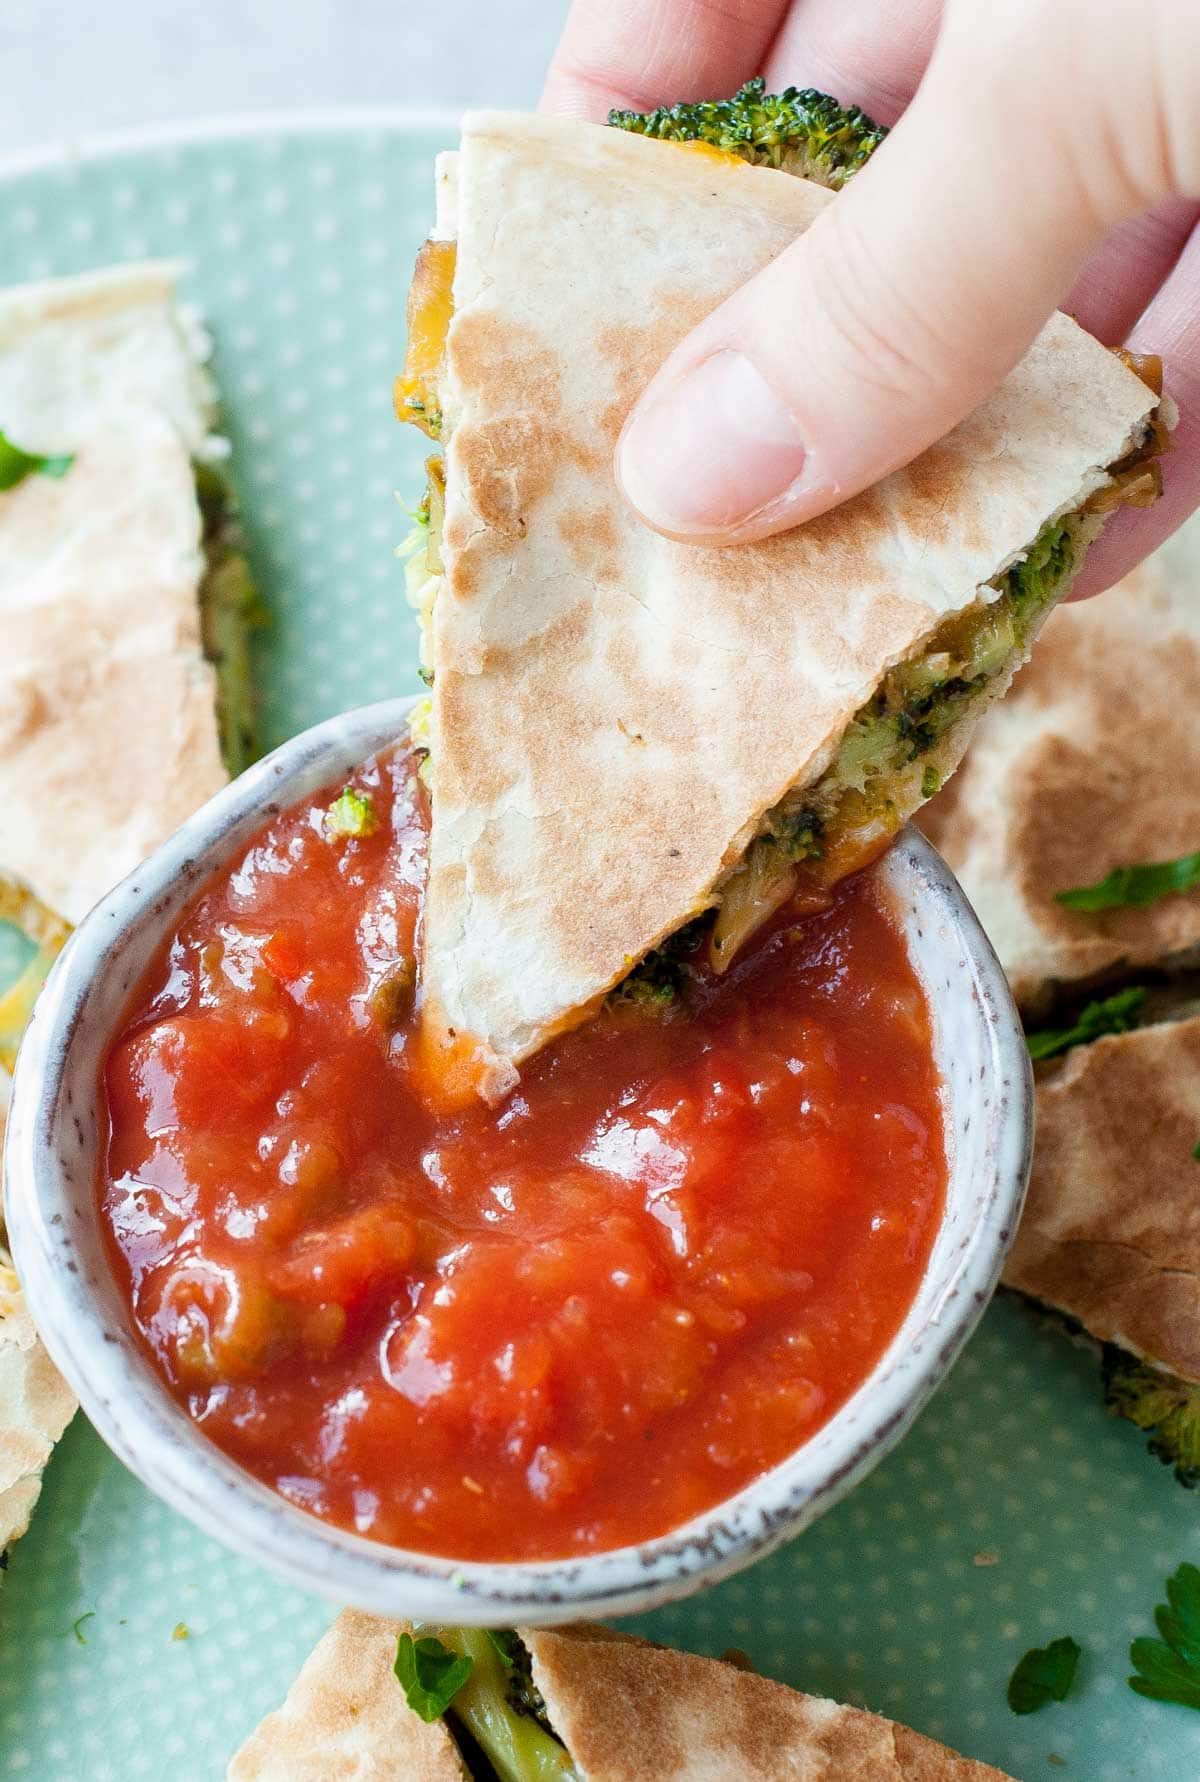 Broccoli quesadillas are being dipped in tomato salsa.